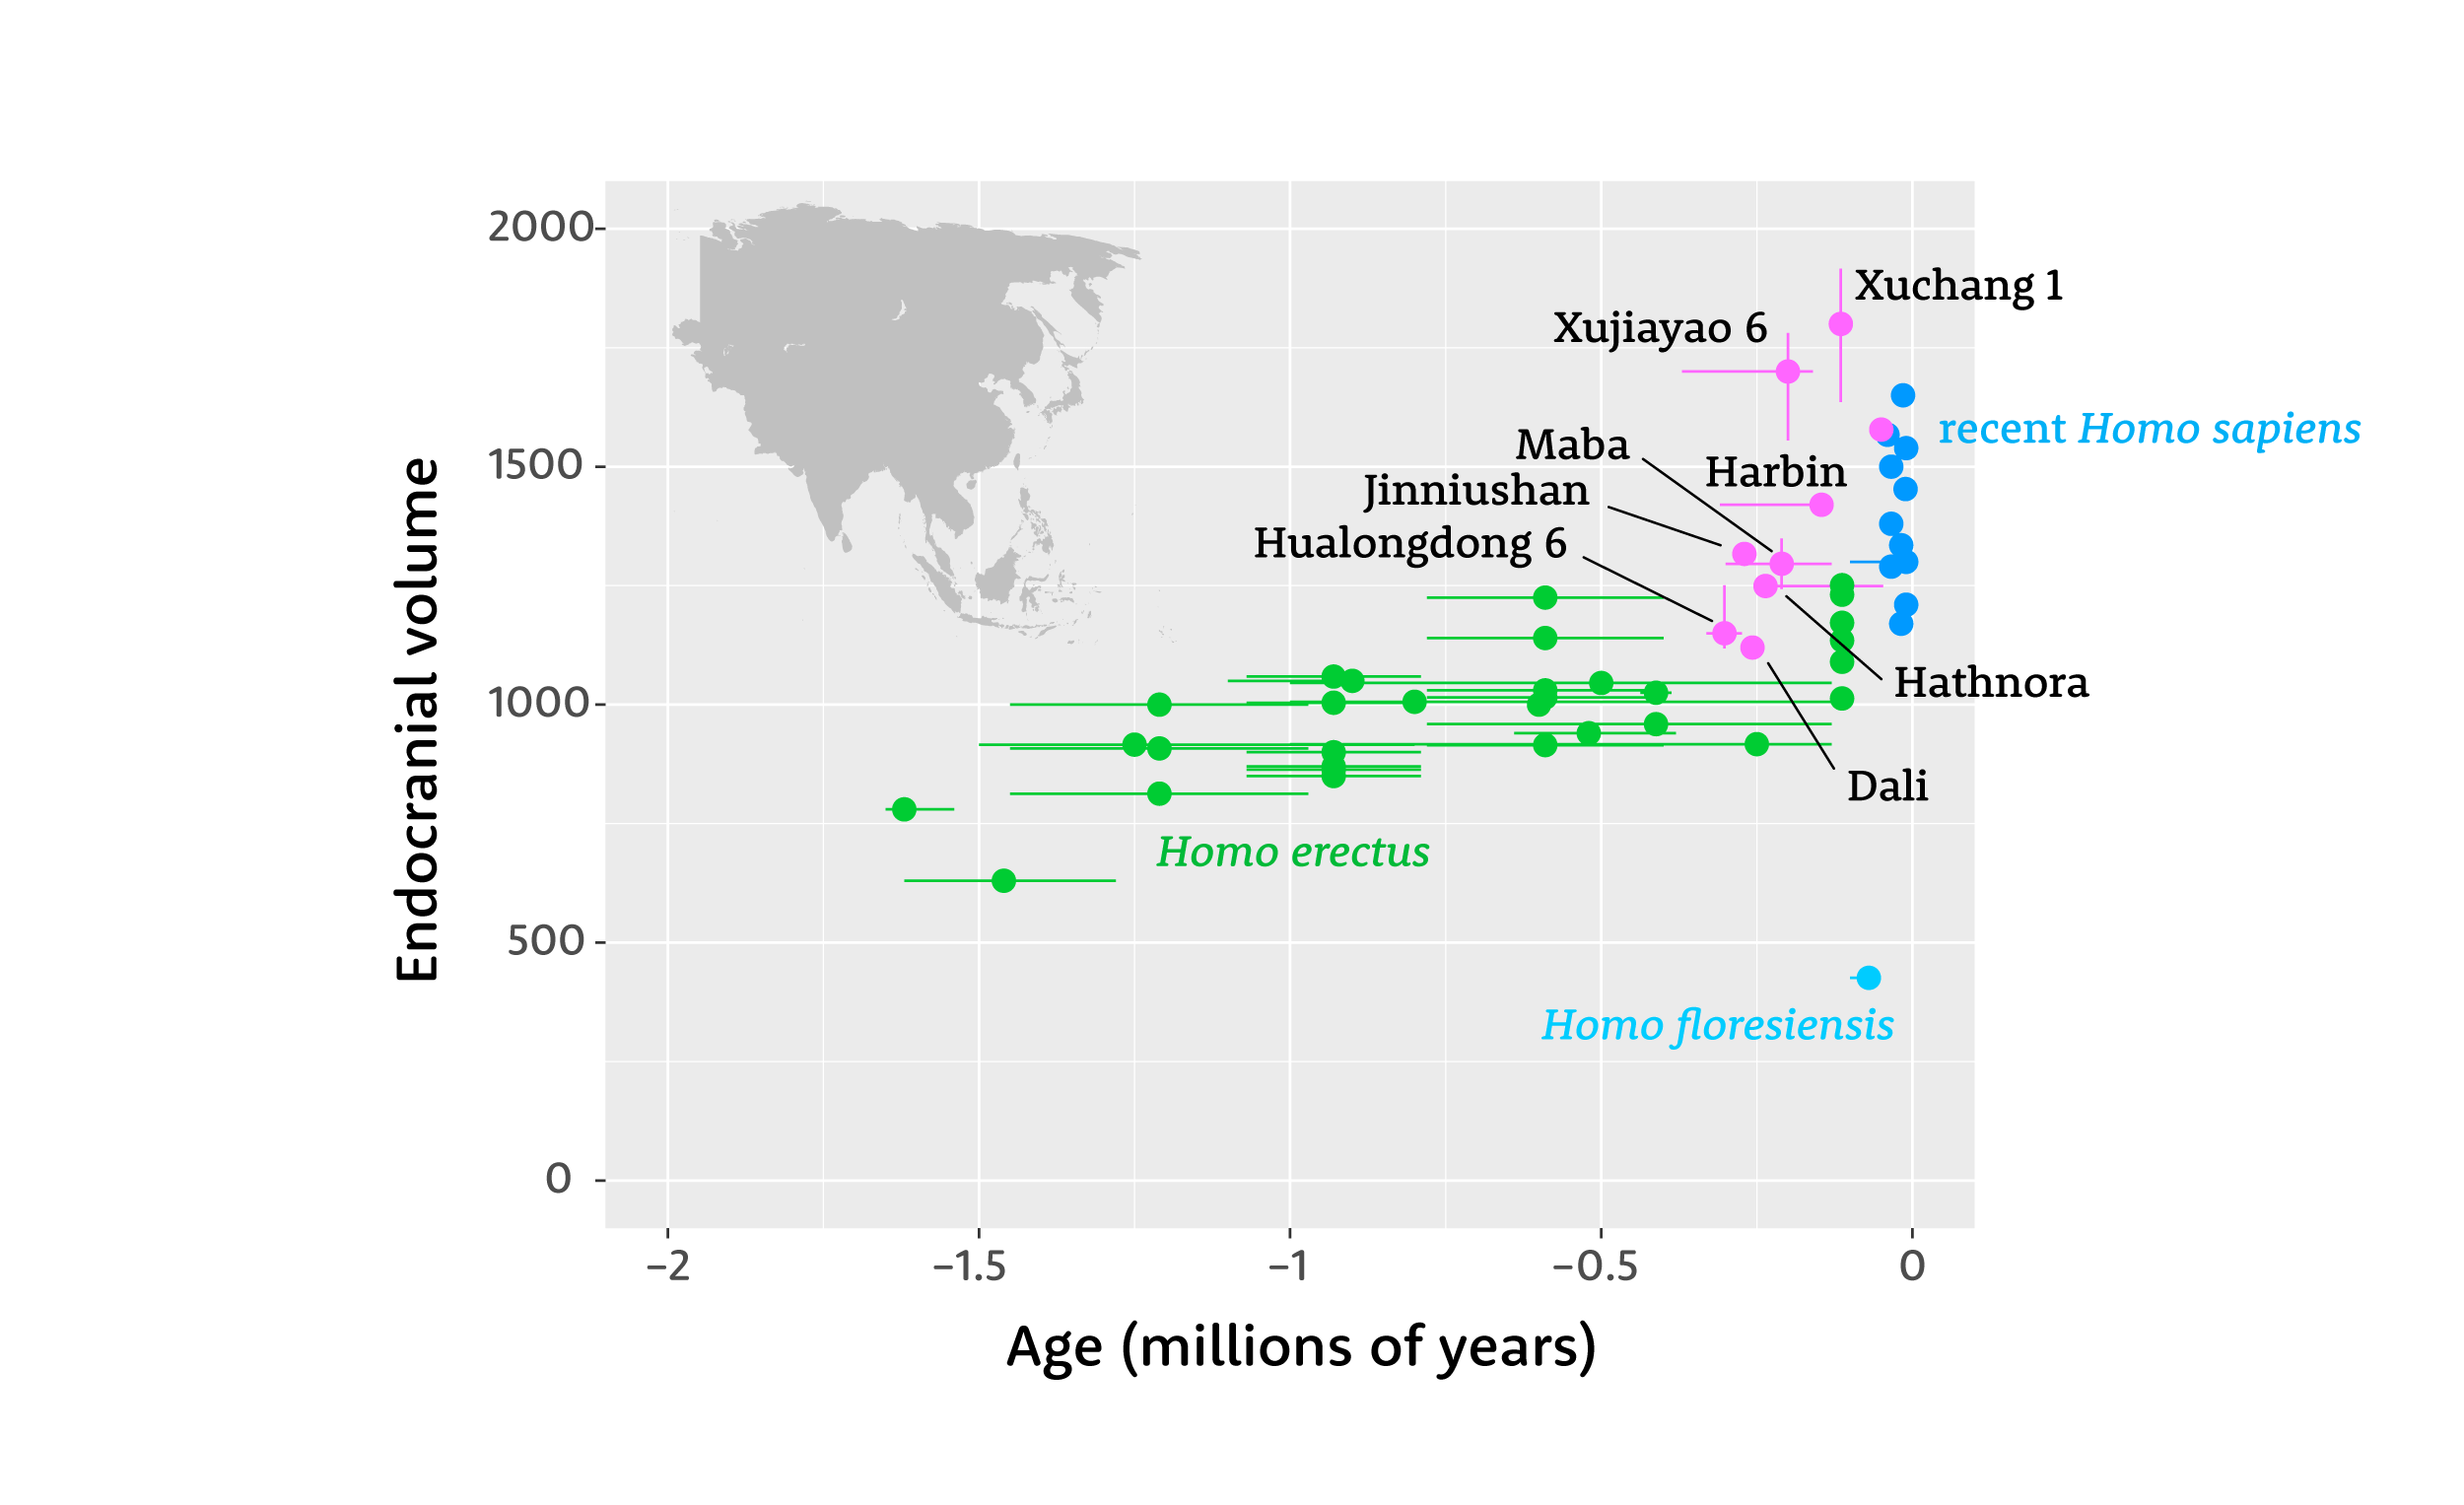 A plot with dots indicating the endocranial volume and geological age of many fossils, with H. erectus, H. floresiensis, recent H. sapiens indicated as samples, and individual fossils from the Middle Pleistocene of China labeled individually. Xujiayao 6 and Xuchang 1 stand out as outliers with large brain size.